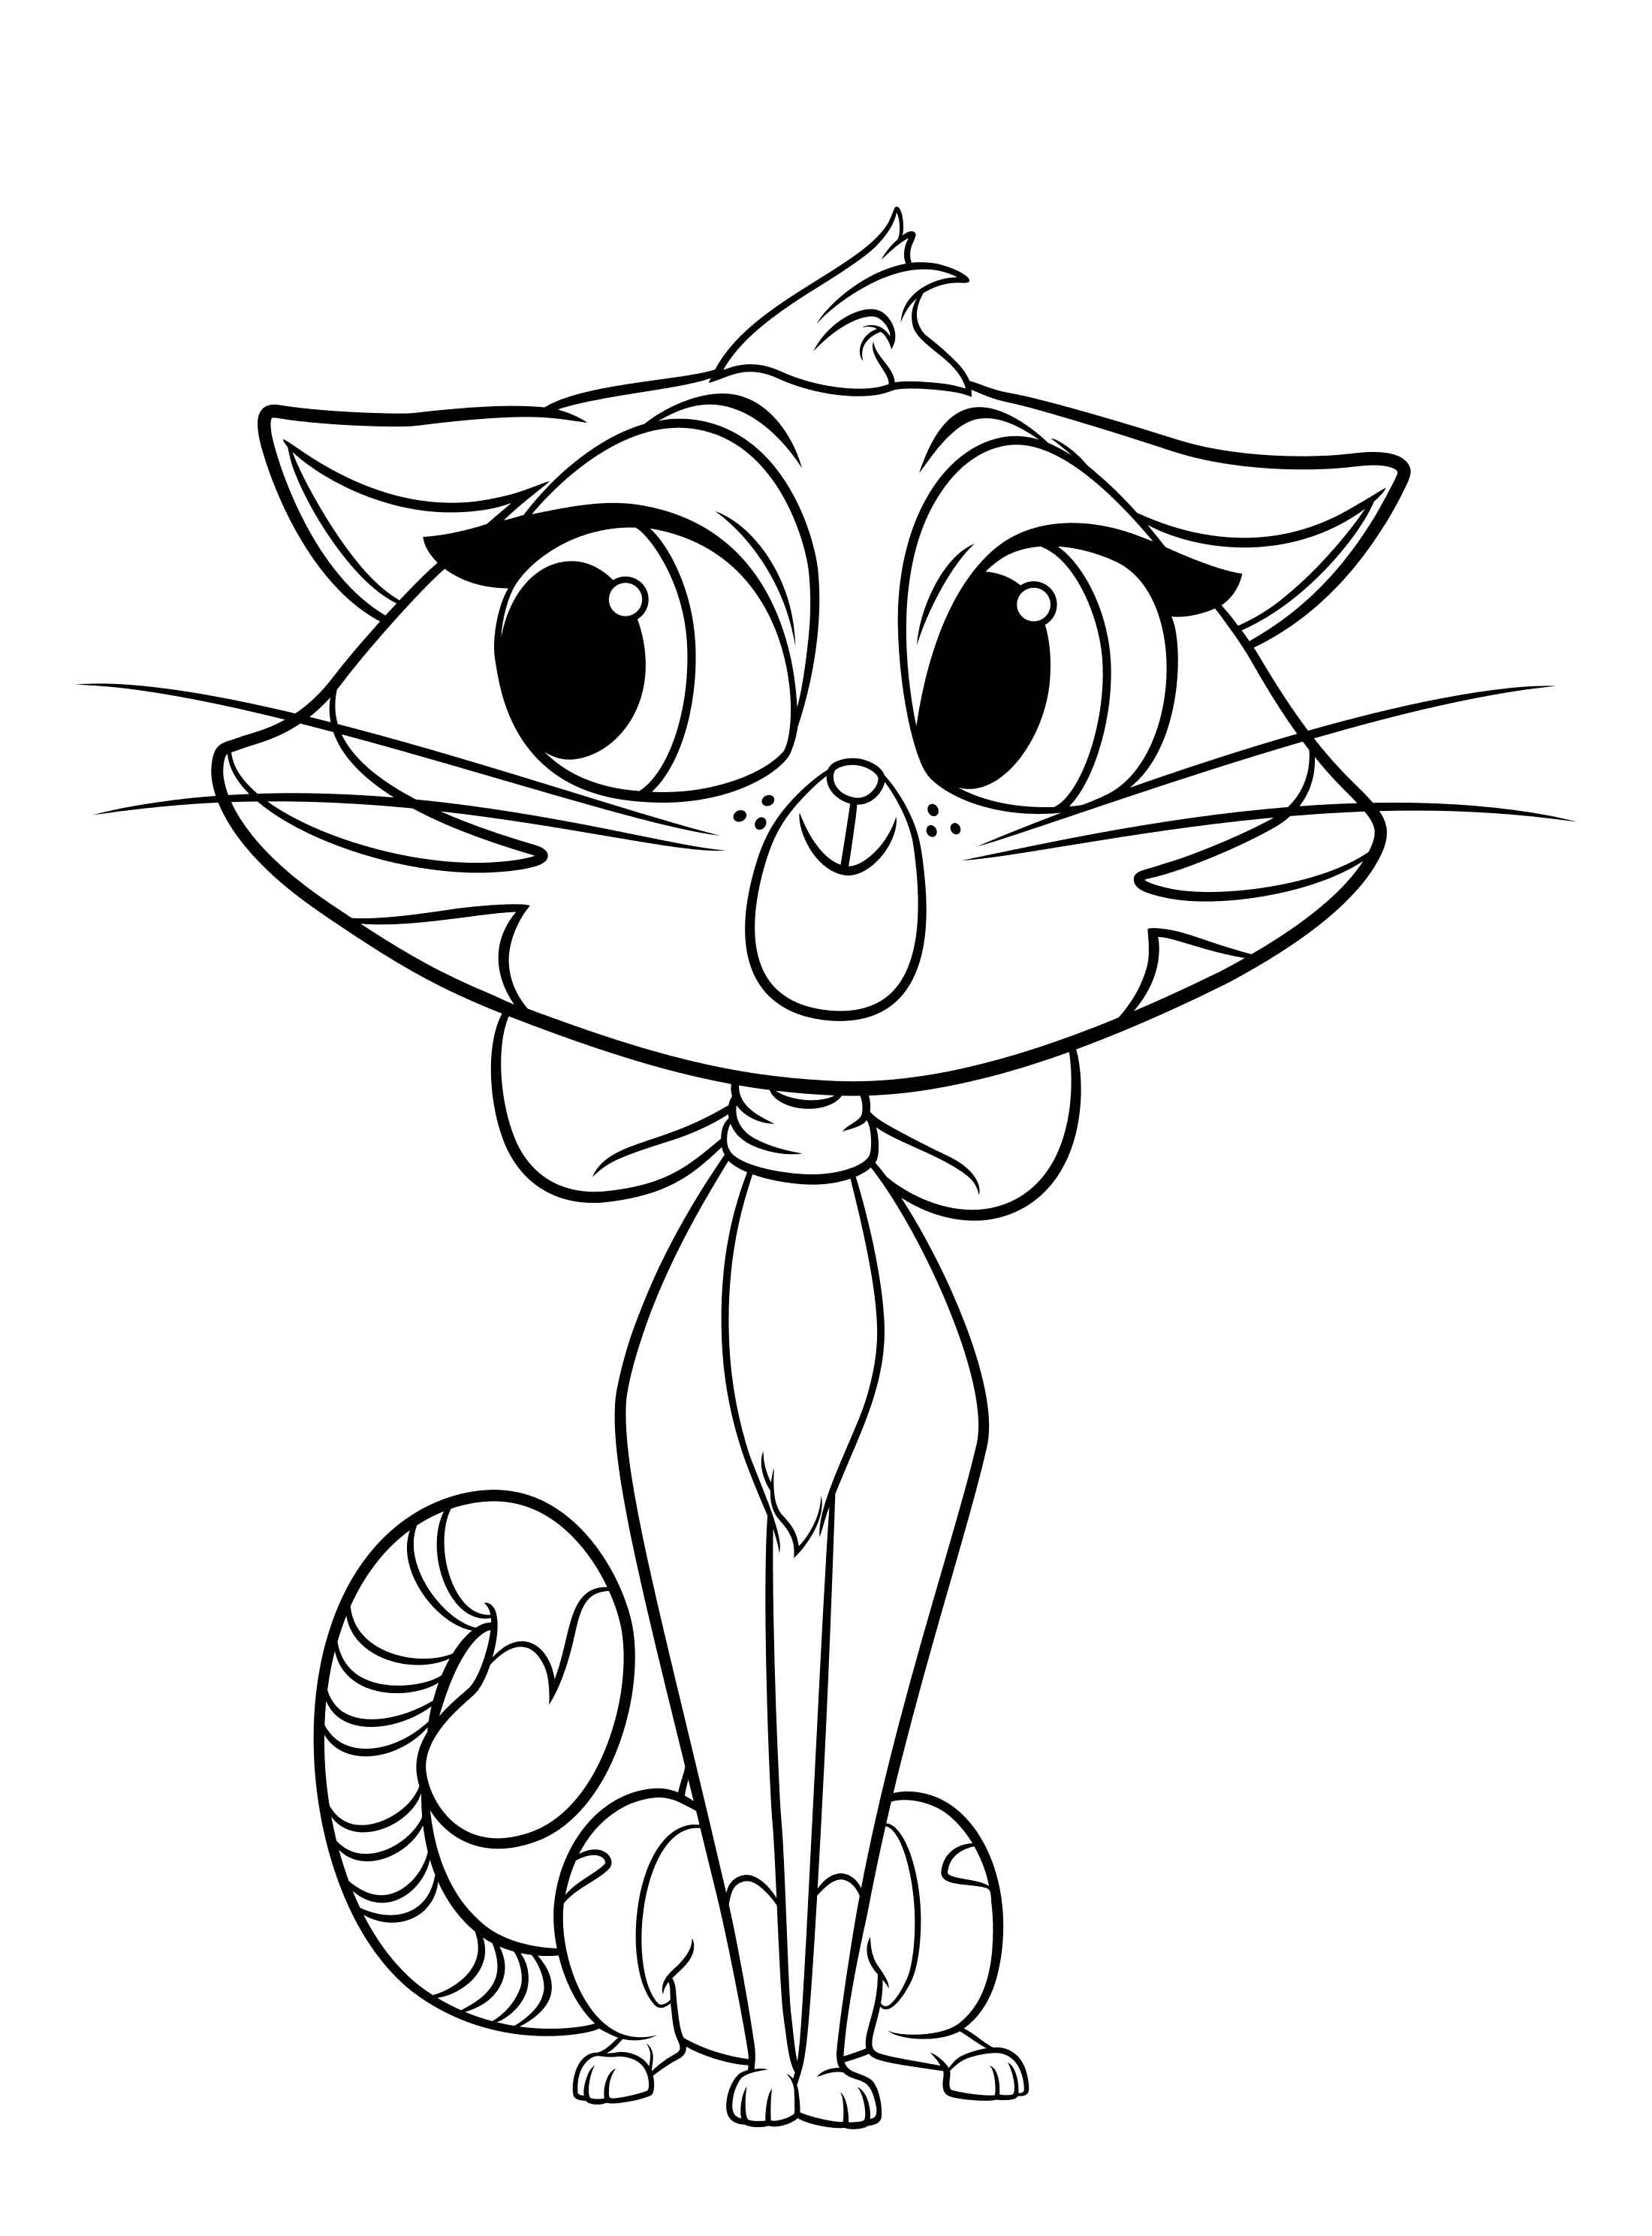 Puppy Dog Pals Coloring Pages - Best Coloring Pages For Kids